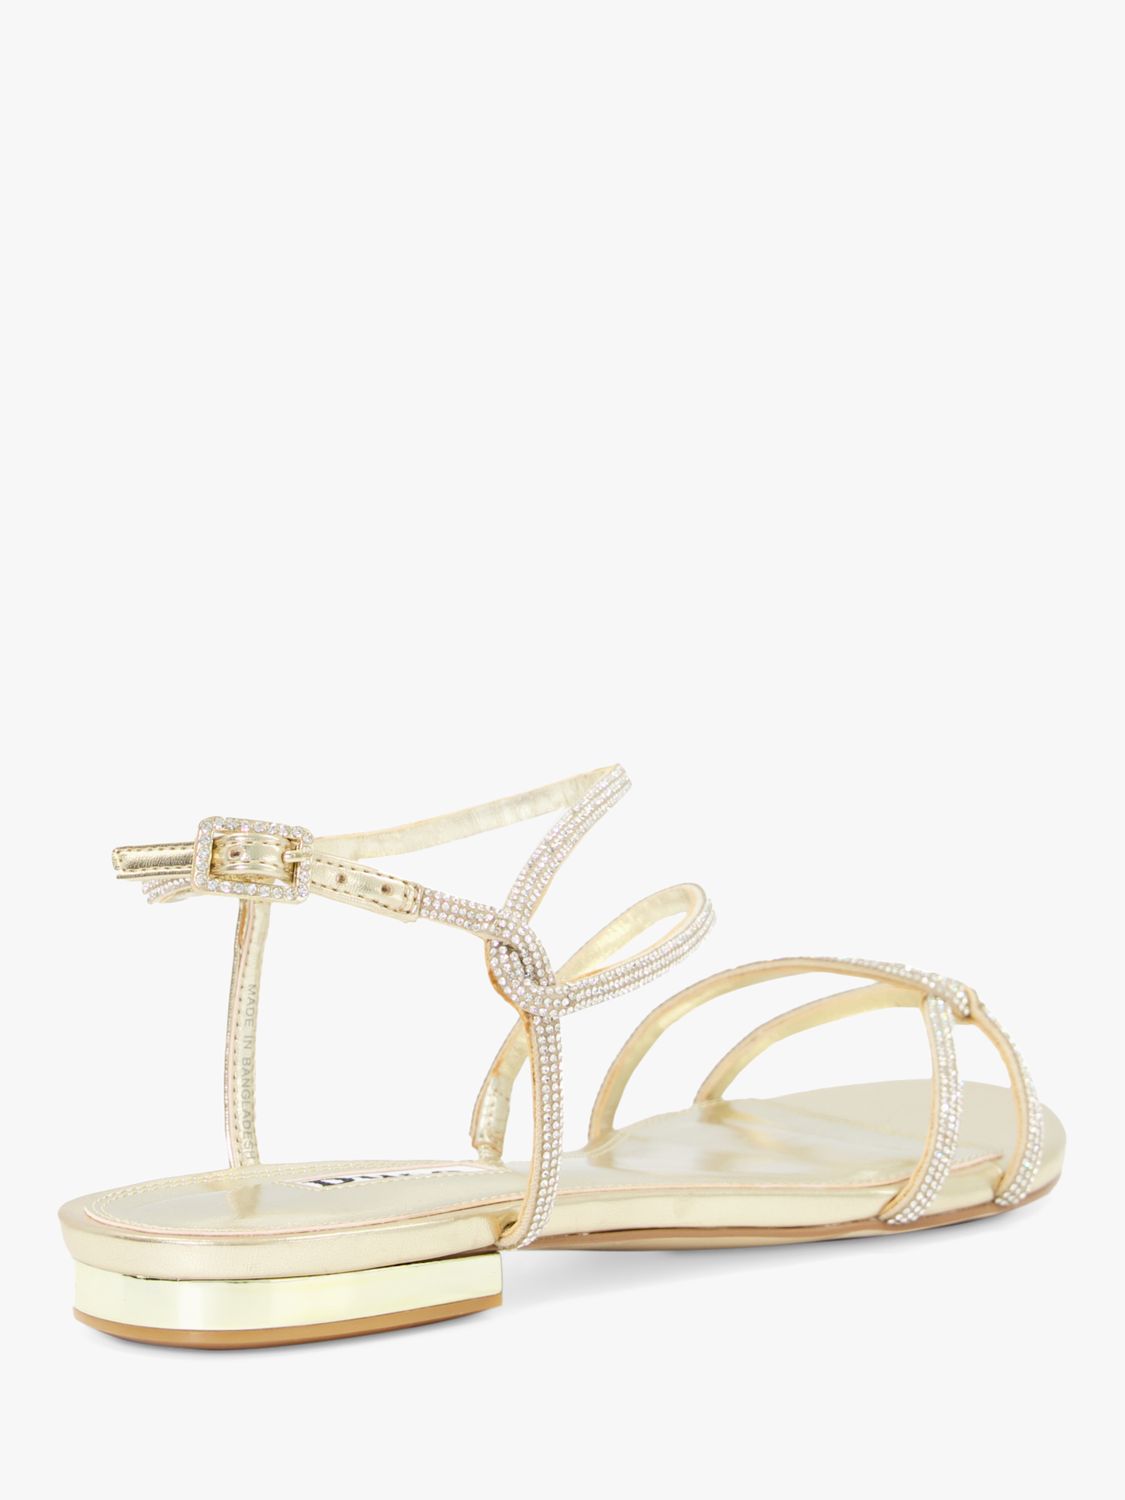 Buy Dune Wide Fit Nightly Jewel Sandals, Champagne Online at johnlewis.com